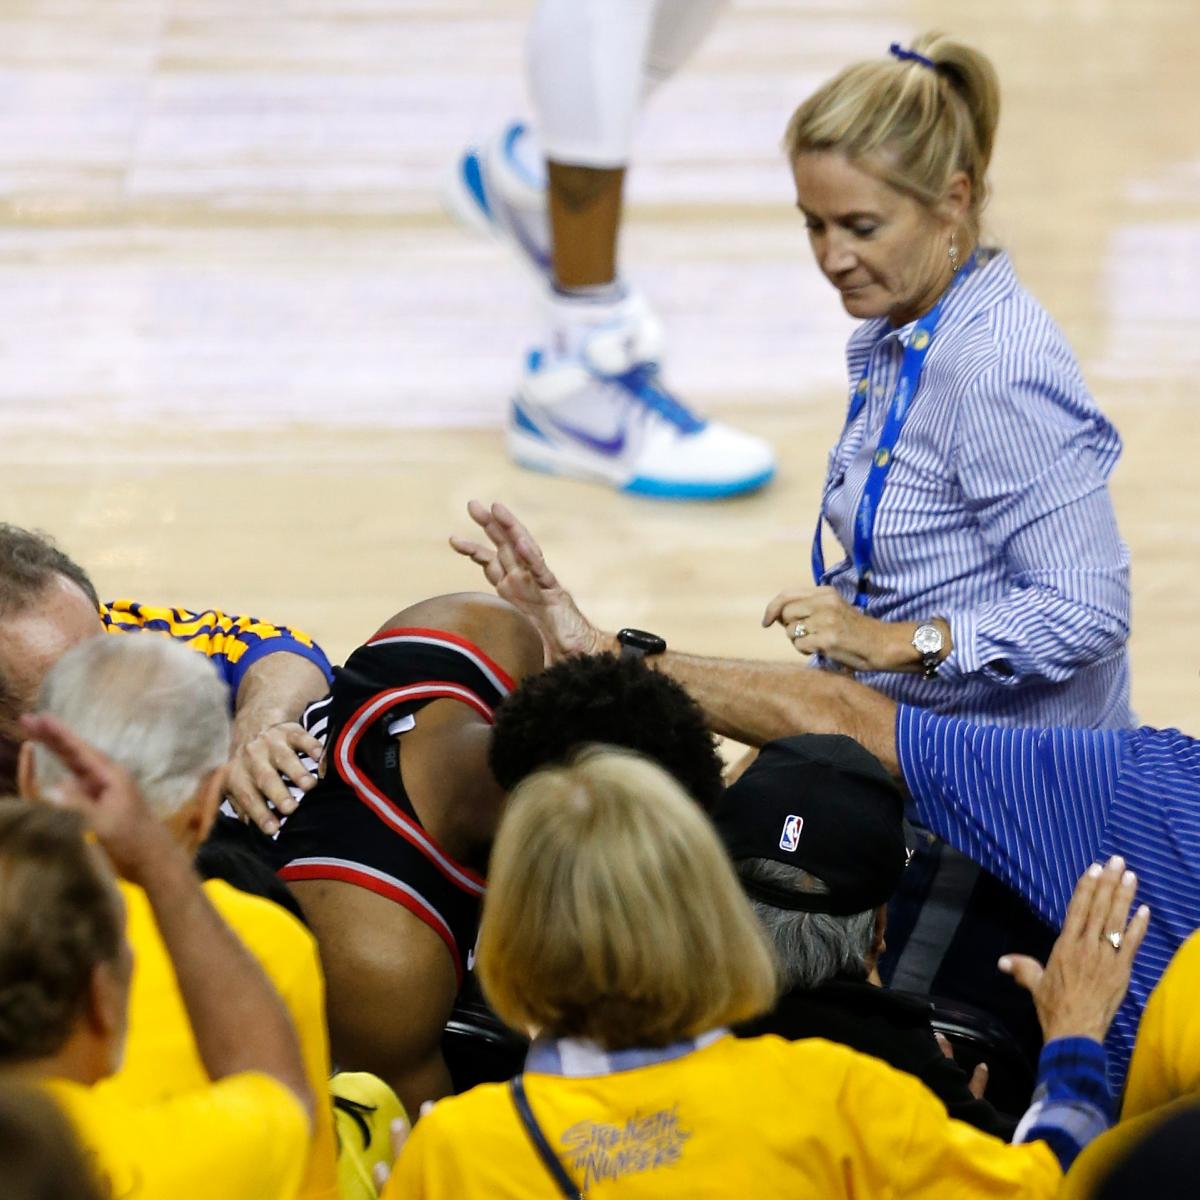 Warriors Part Owner Mark Stevens Pushed Kyle Lowry; Banned 